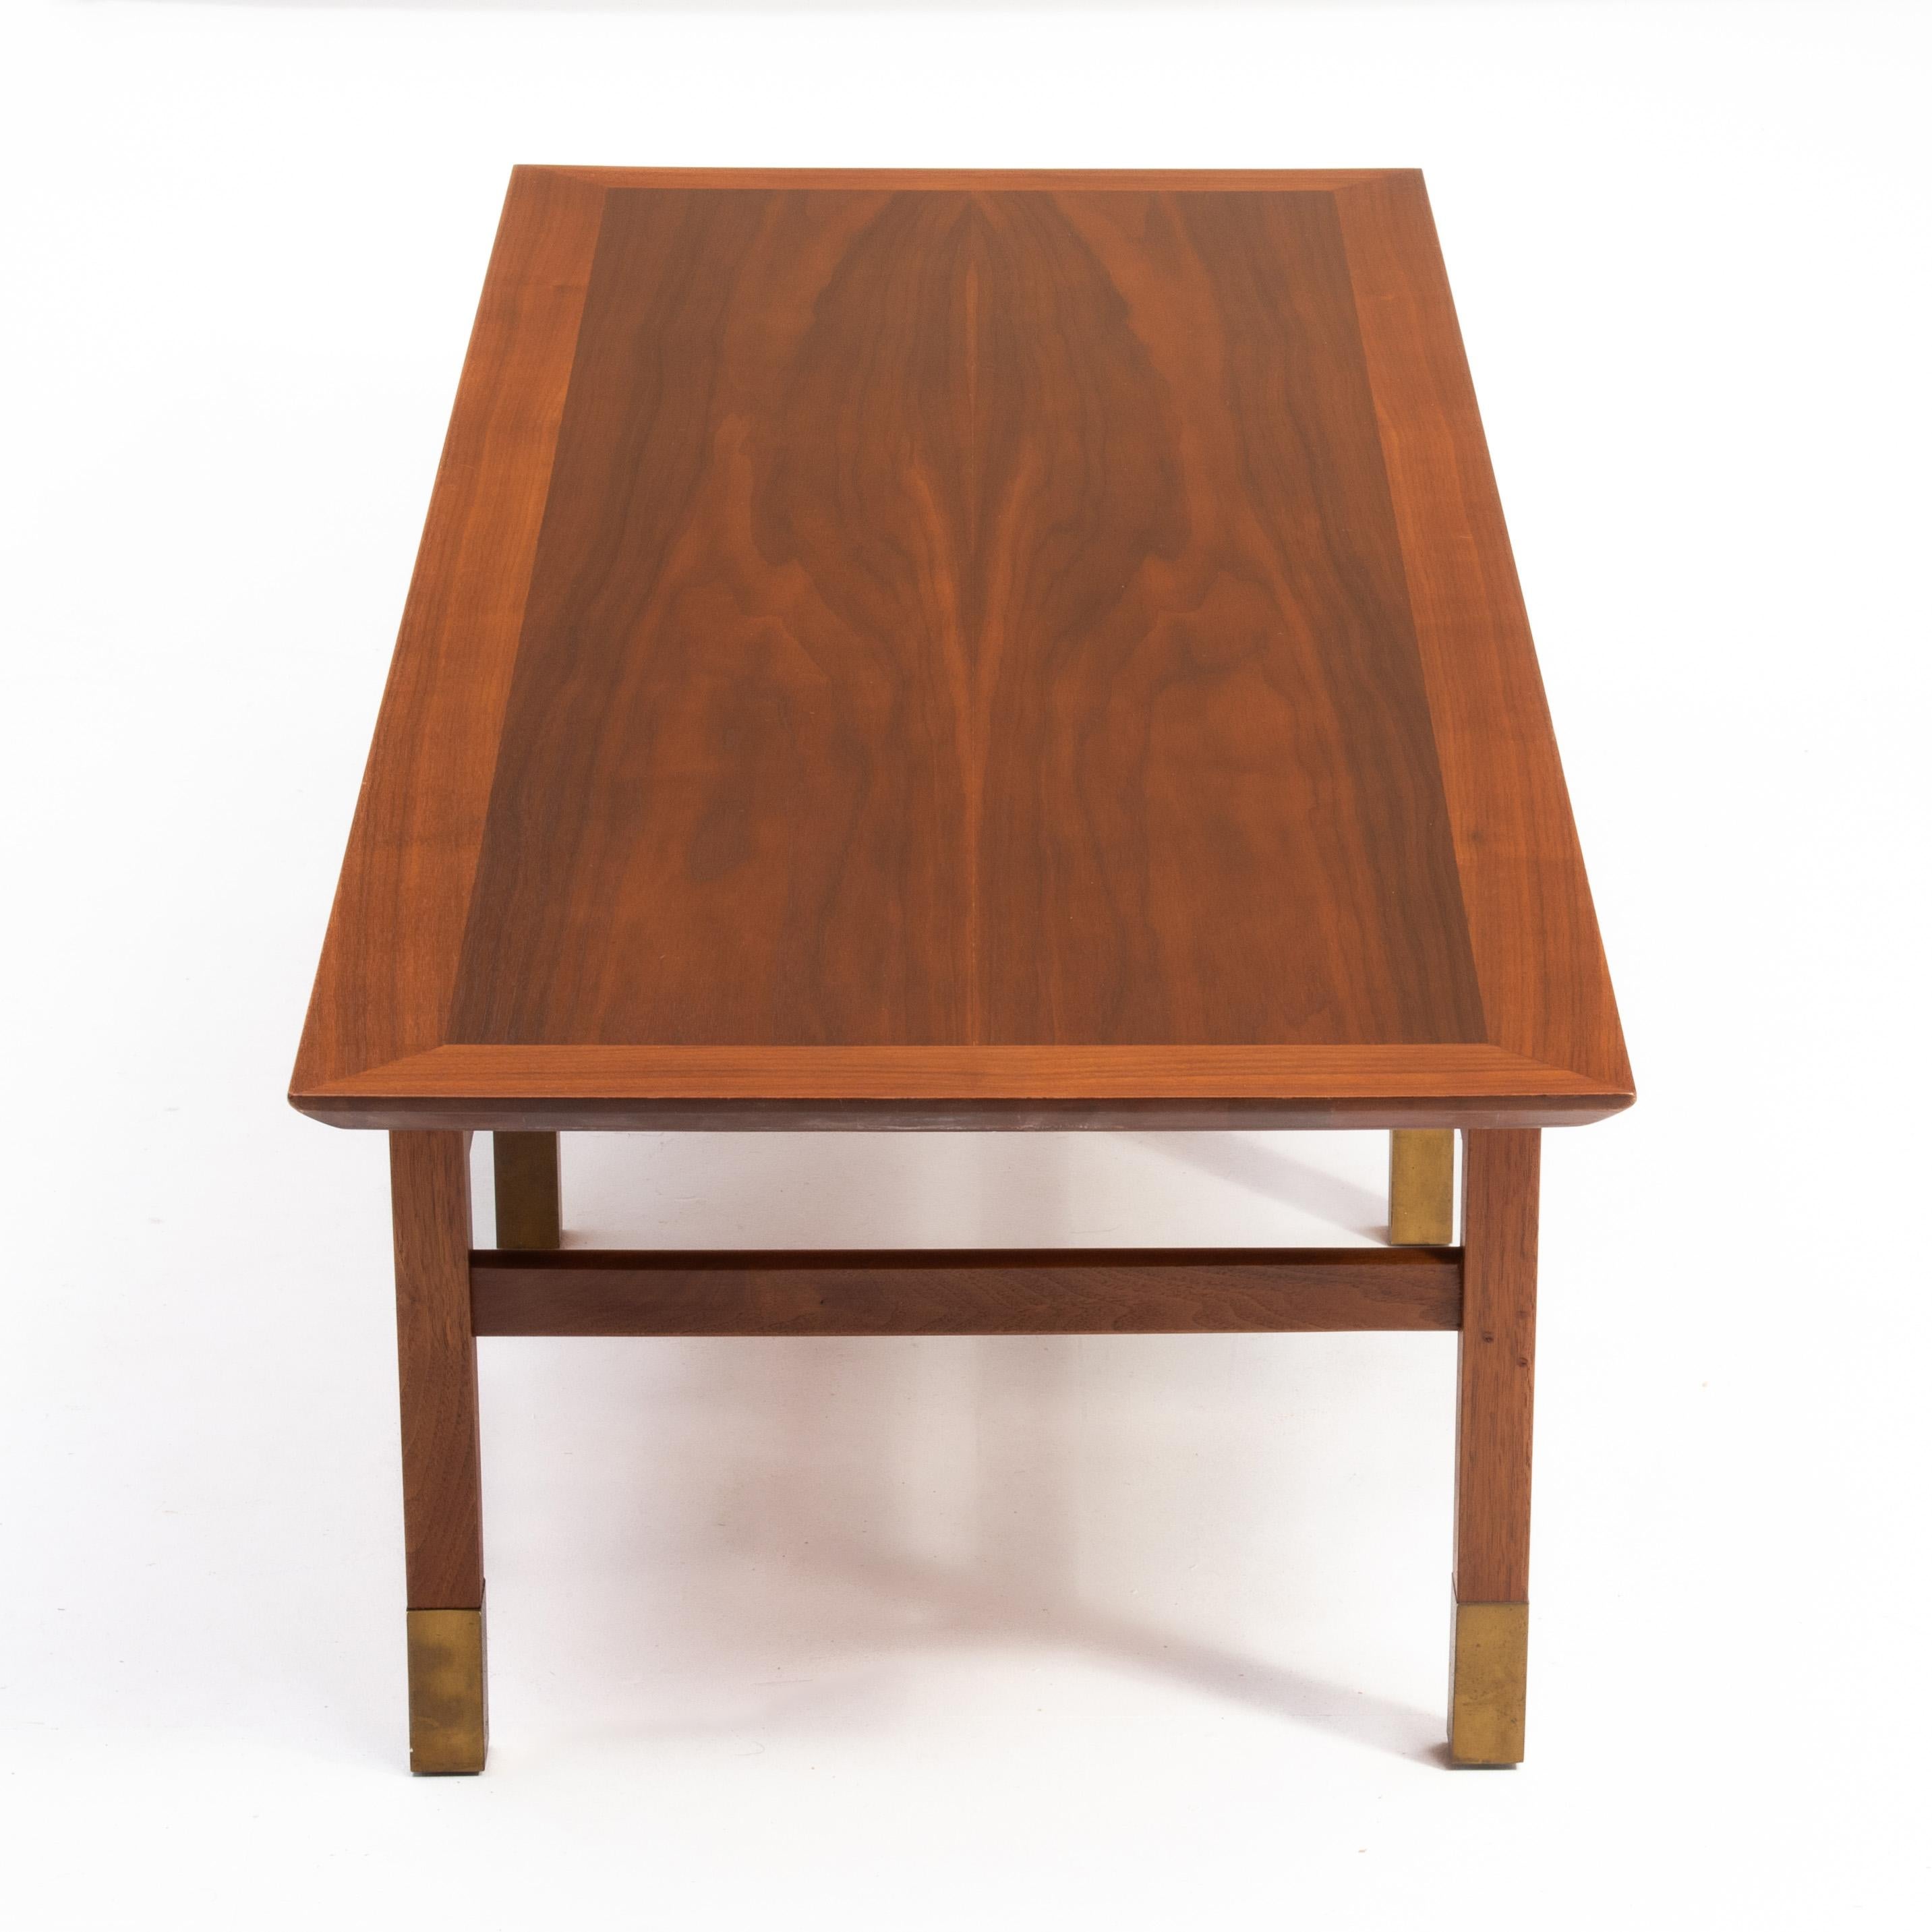 An unmarked Founders Furniture Mid Century walnut coffee table. The table features a framed book matched top and six brass capped legs. Extremely well made and unmarked as most Founders pieces are.